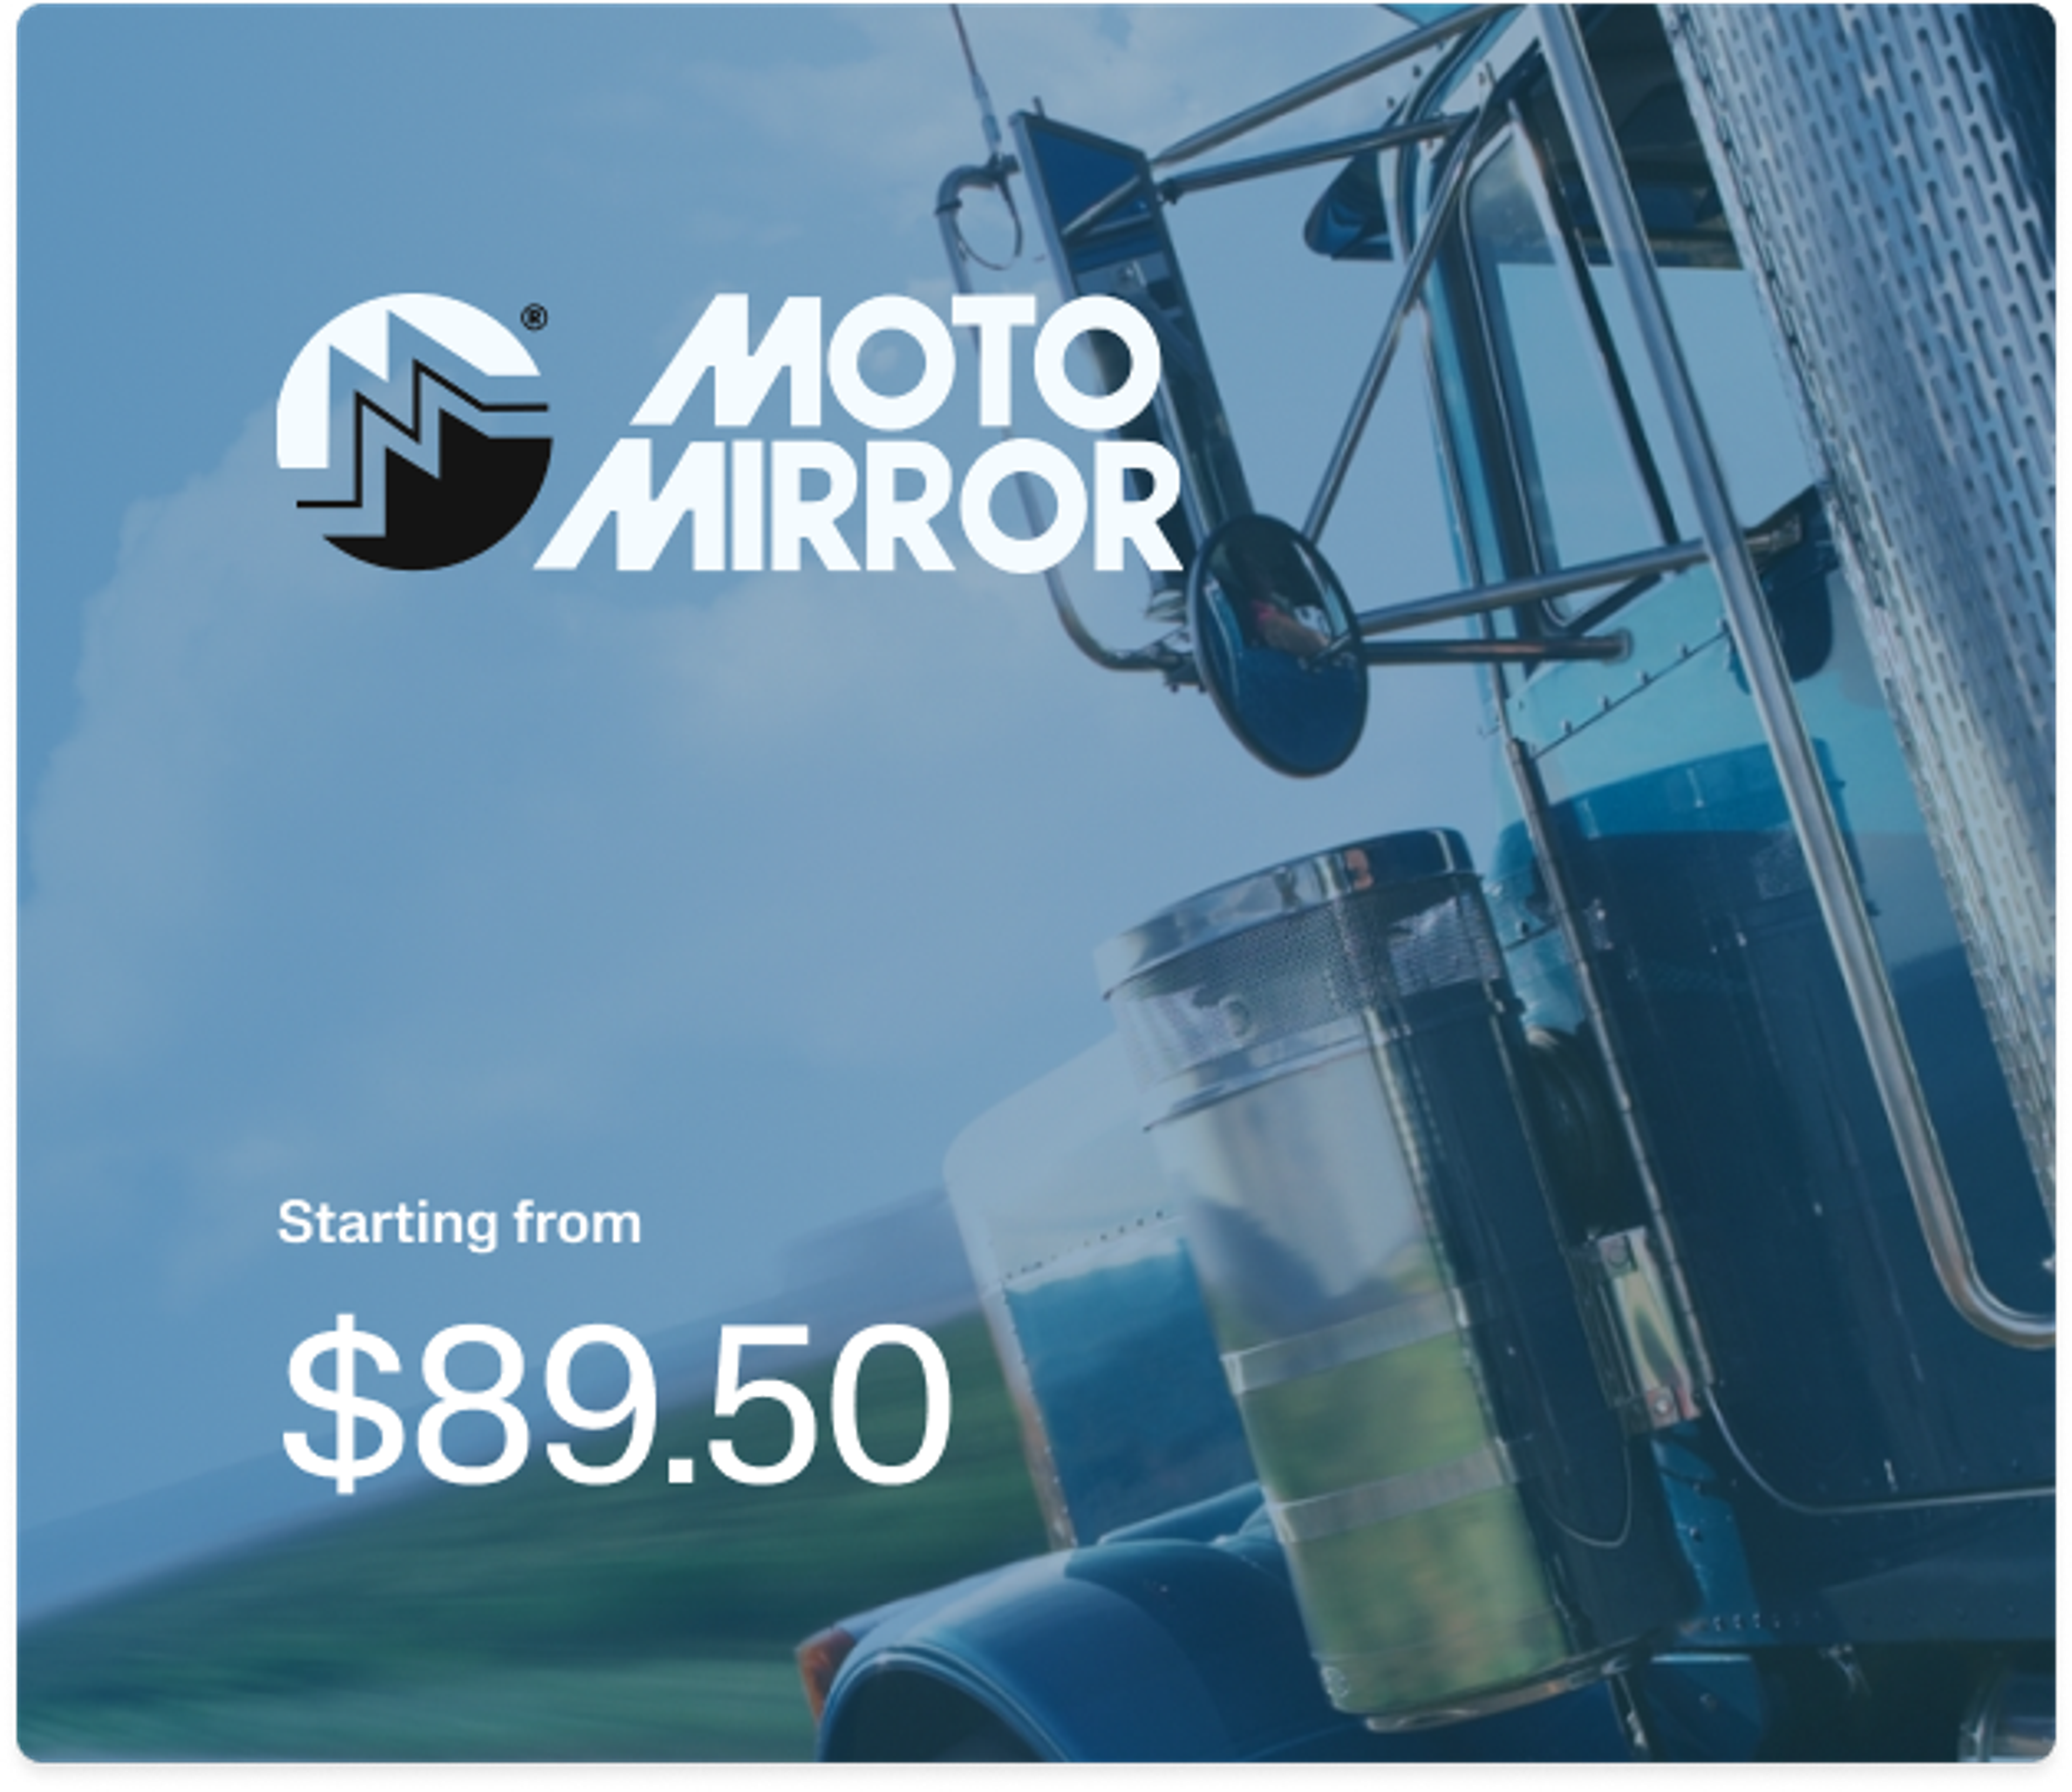 After market Truck parts - Mirrors